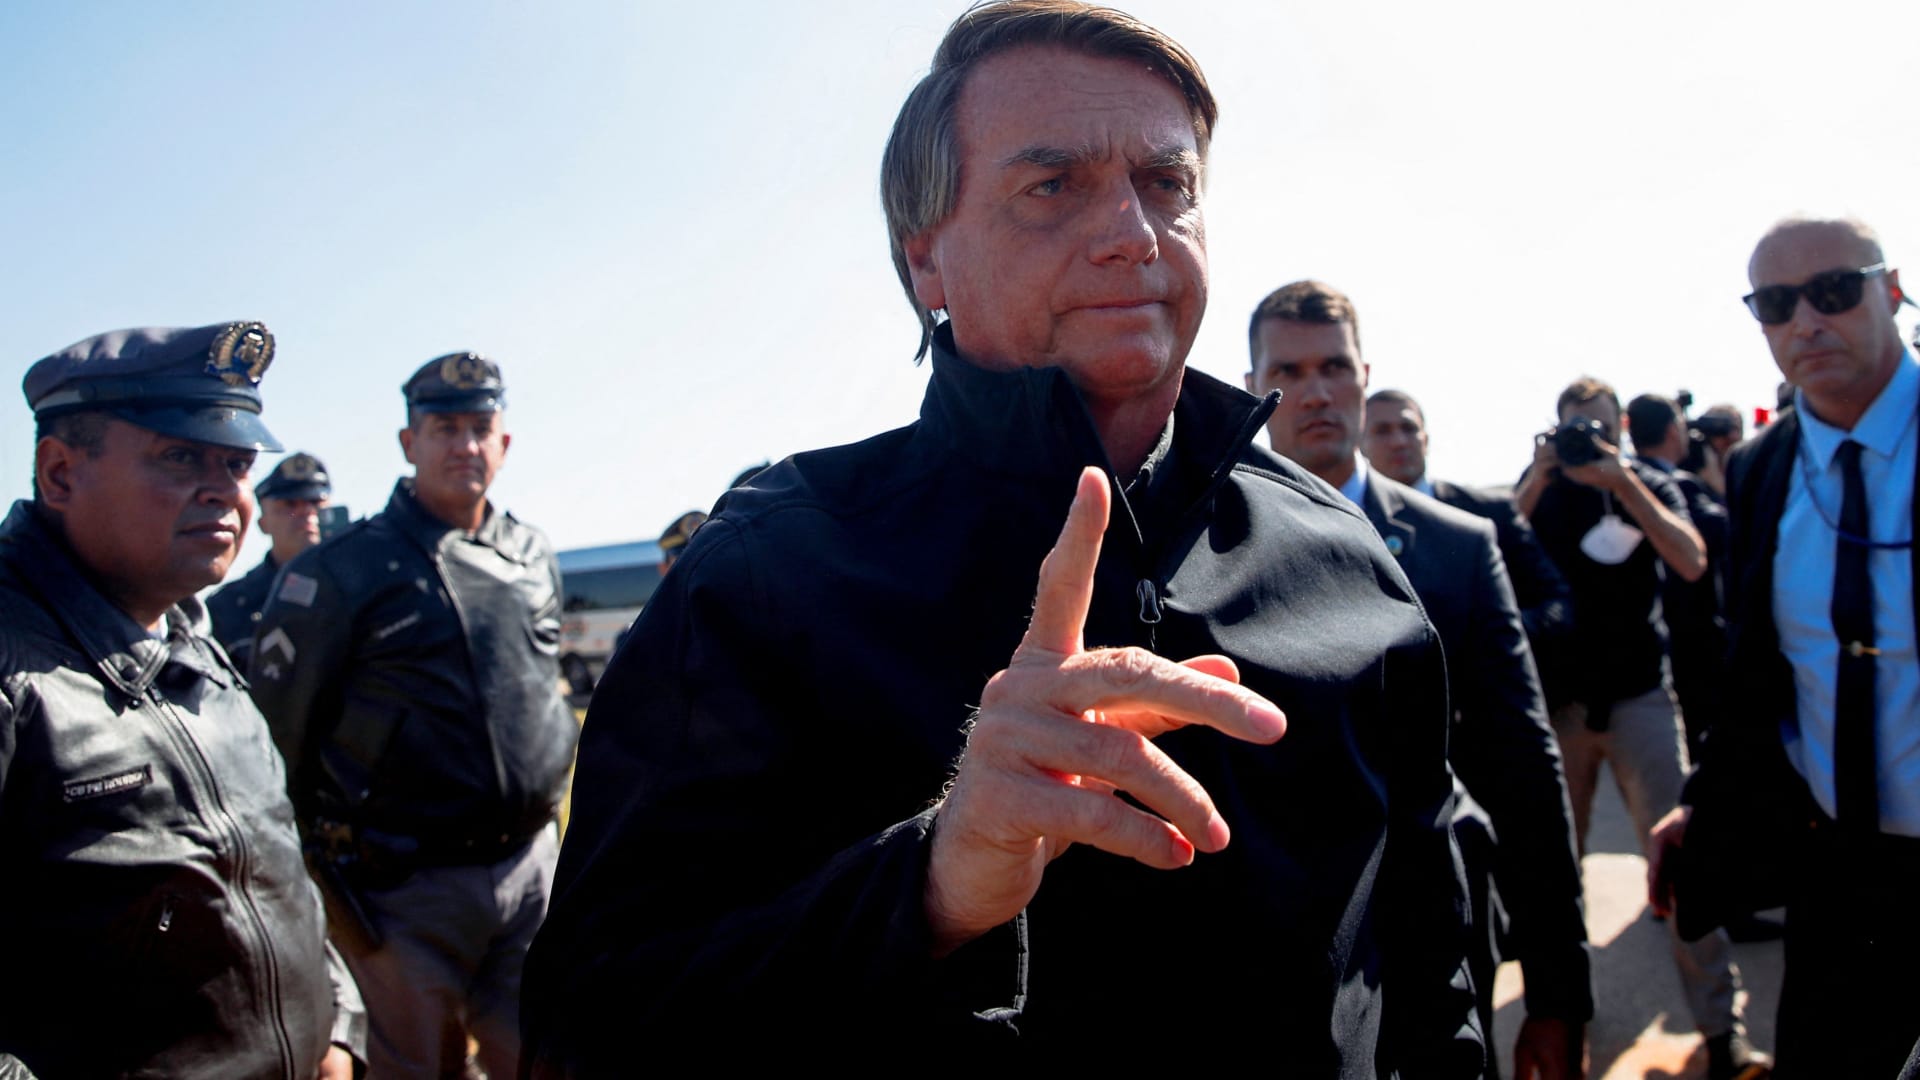 Brazil's president Jair Bolsonaro gestures as he arrives at a hotel to participate in a news conference about the Amazon rainforest and to meet with Elon Musk, according to ministers, in Porto Feliz, Sao Paulo state, Brazil May 20, 2022.